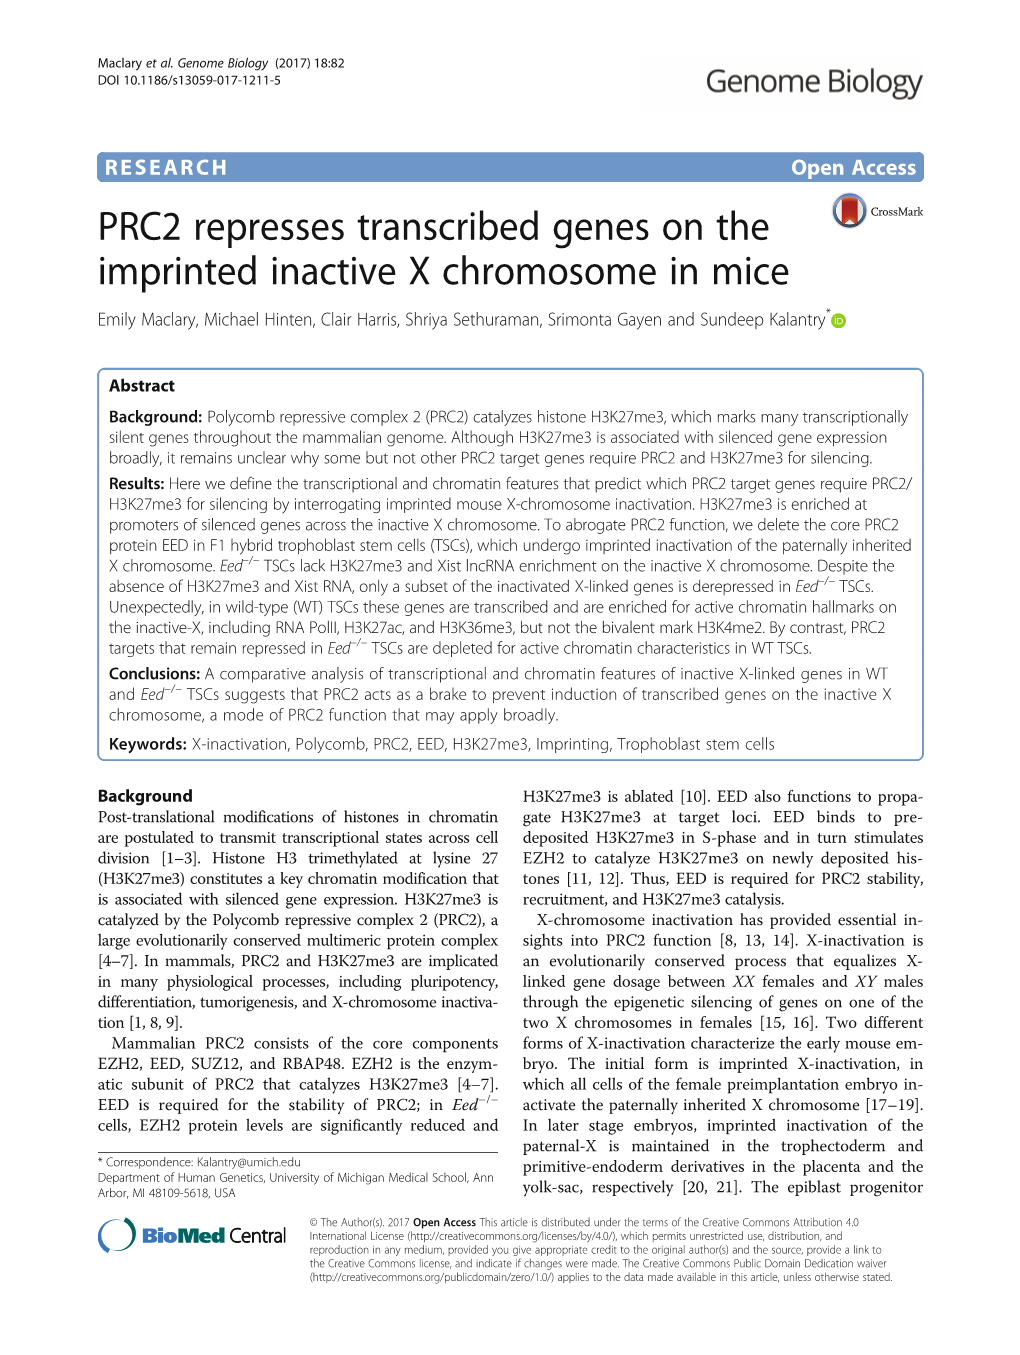 PRC2 Represses Transcribed Genes on the Imprinted Inactive X